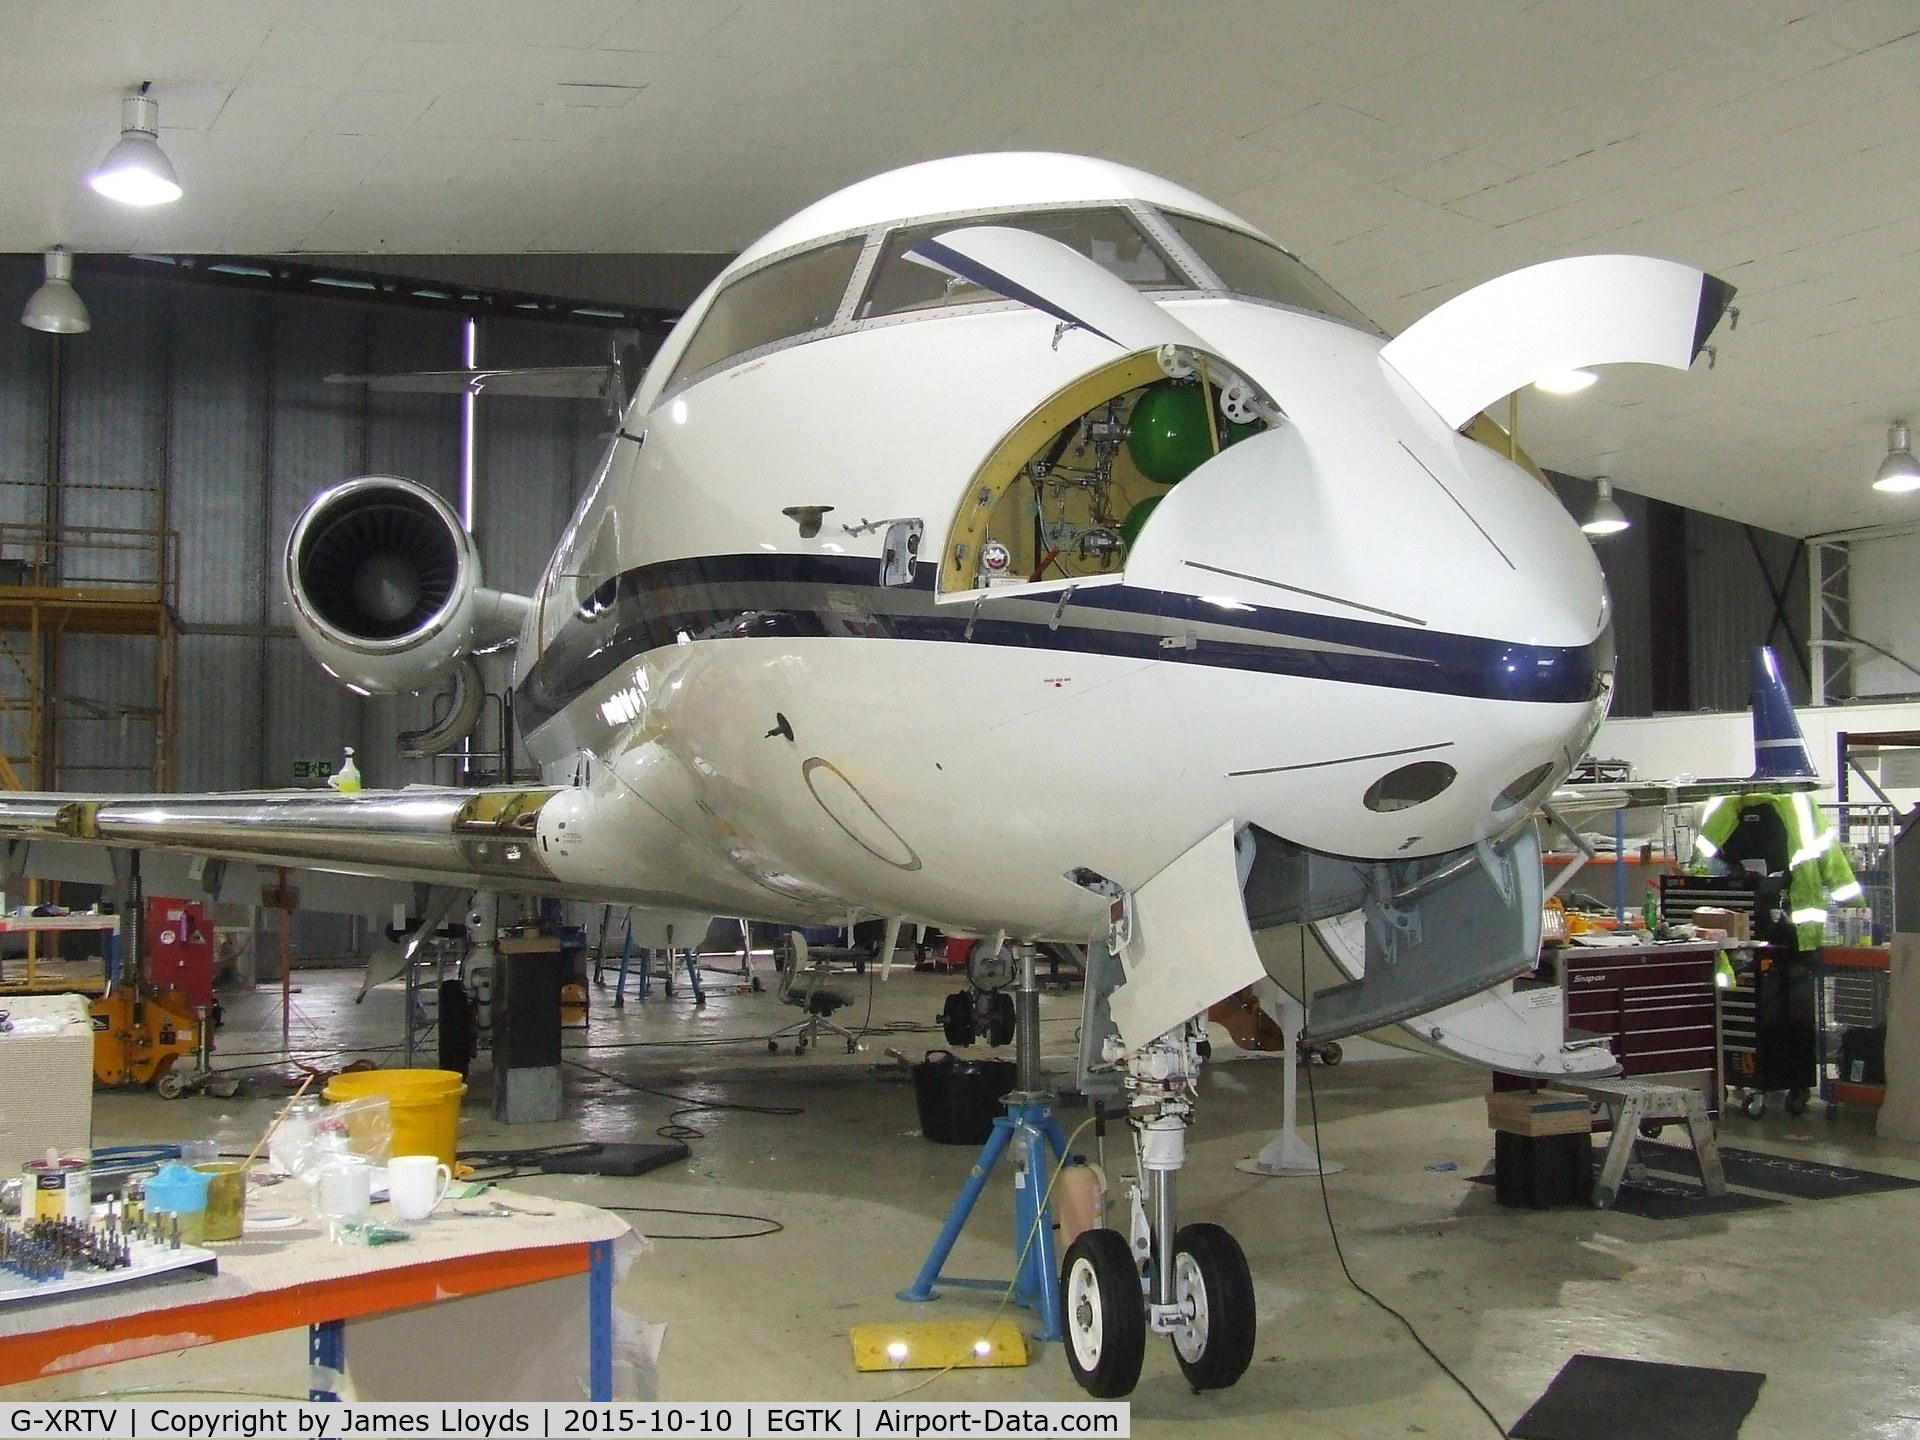 G-XRTV, 1991 Canadair Challenger 601-3A (CL-600-2B16) C/N 5085, Haveing an Main Check inside Hanger 3 At Oxford Airport.